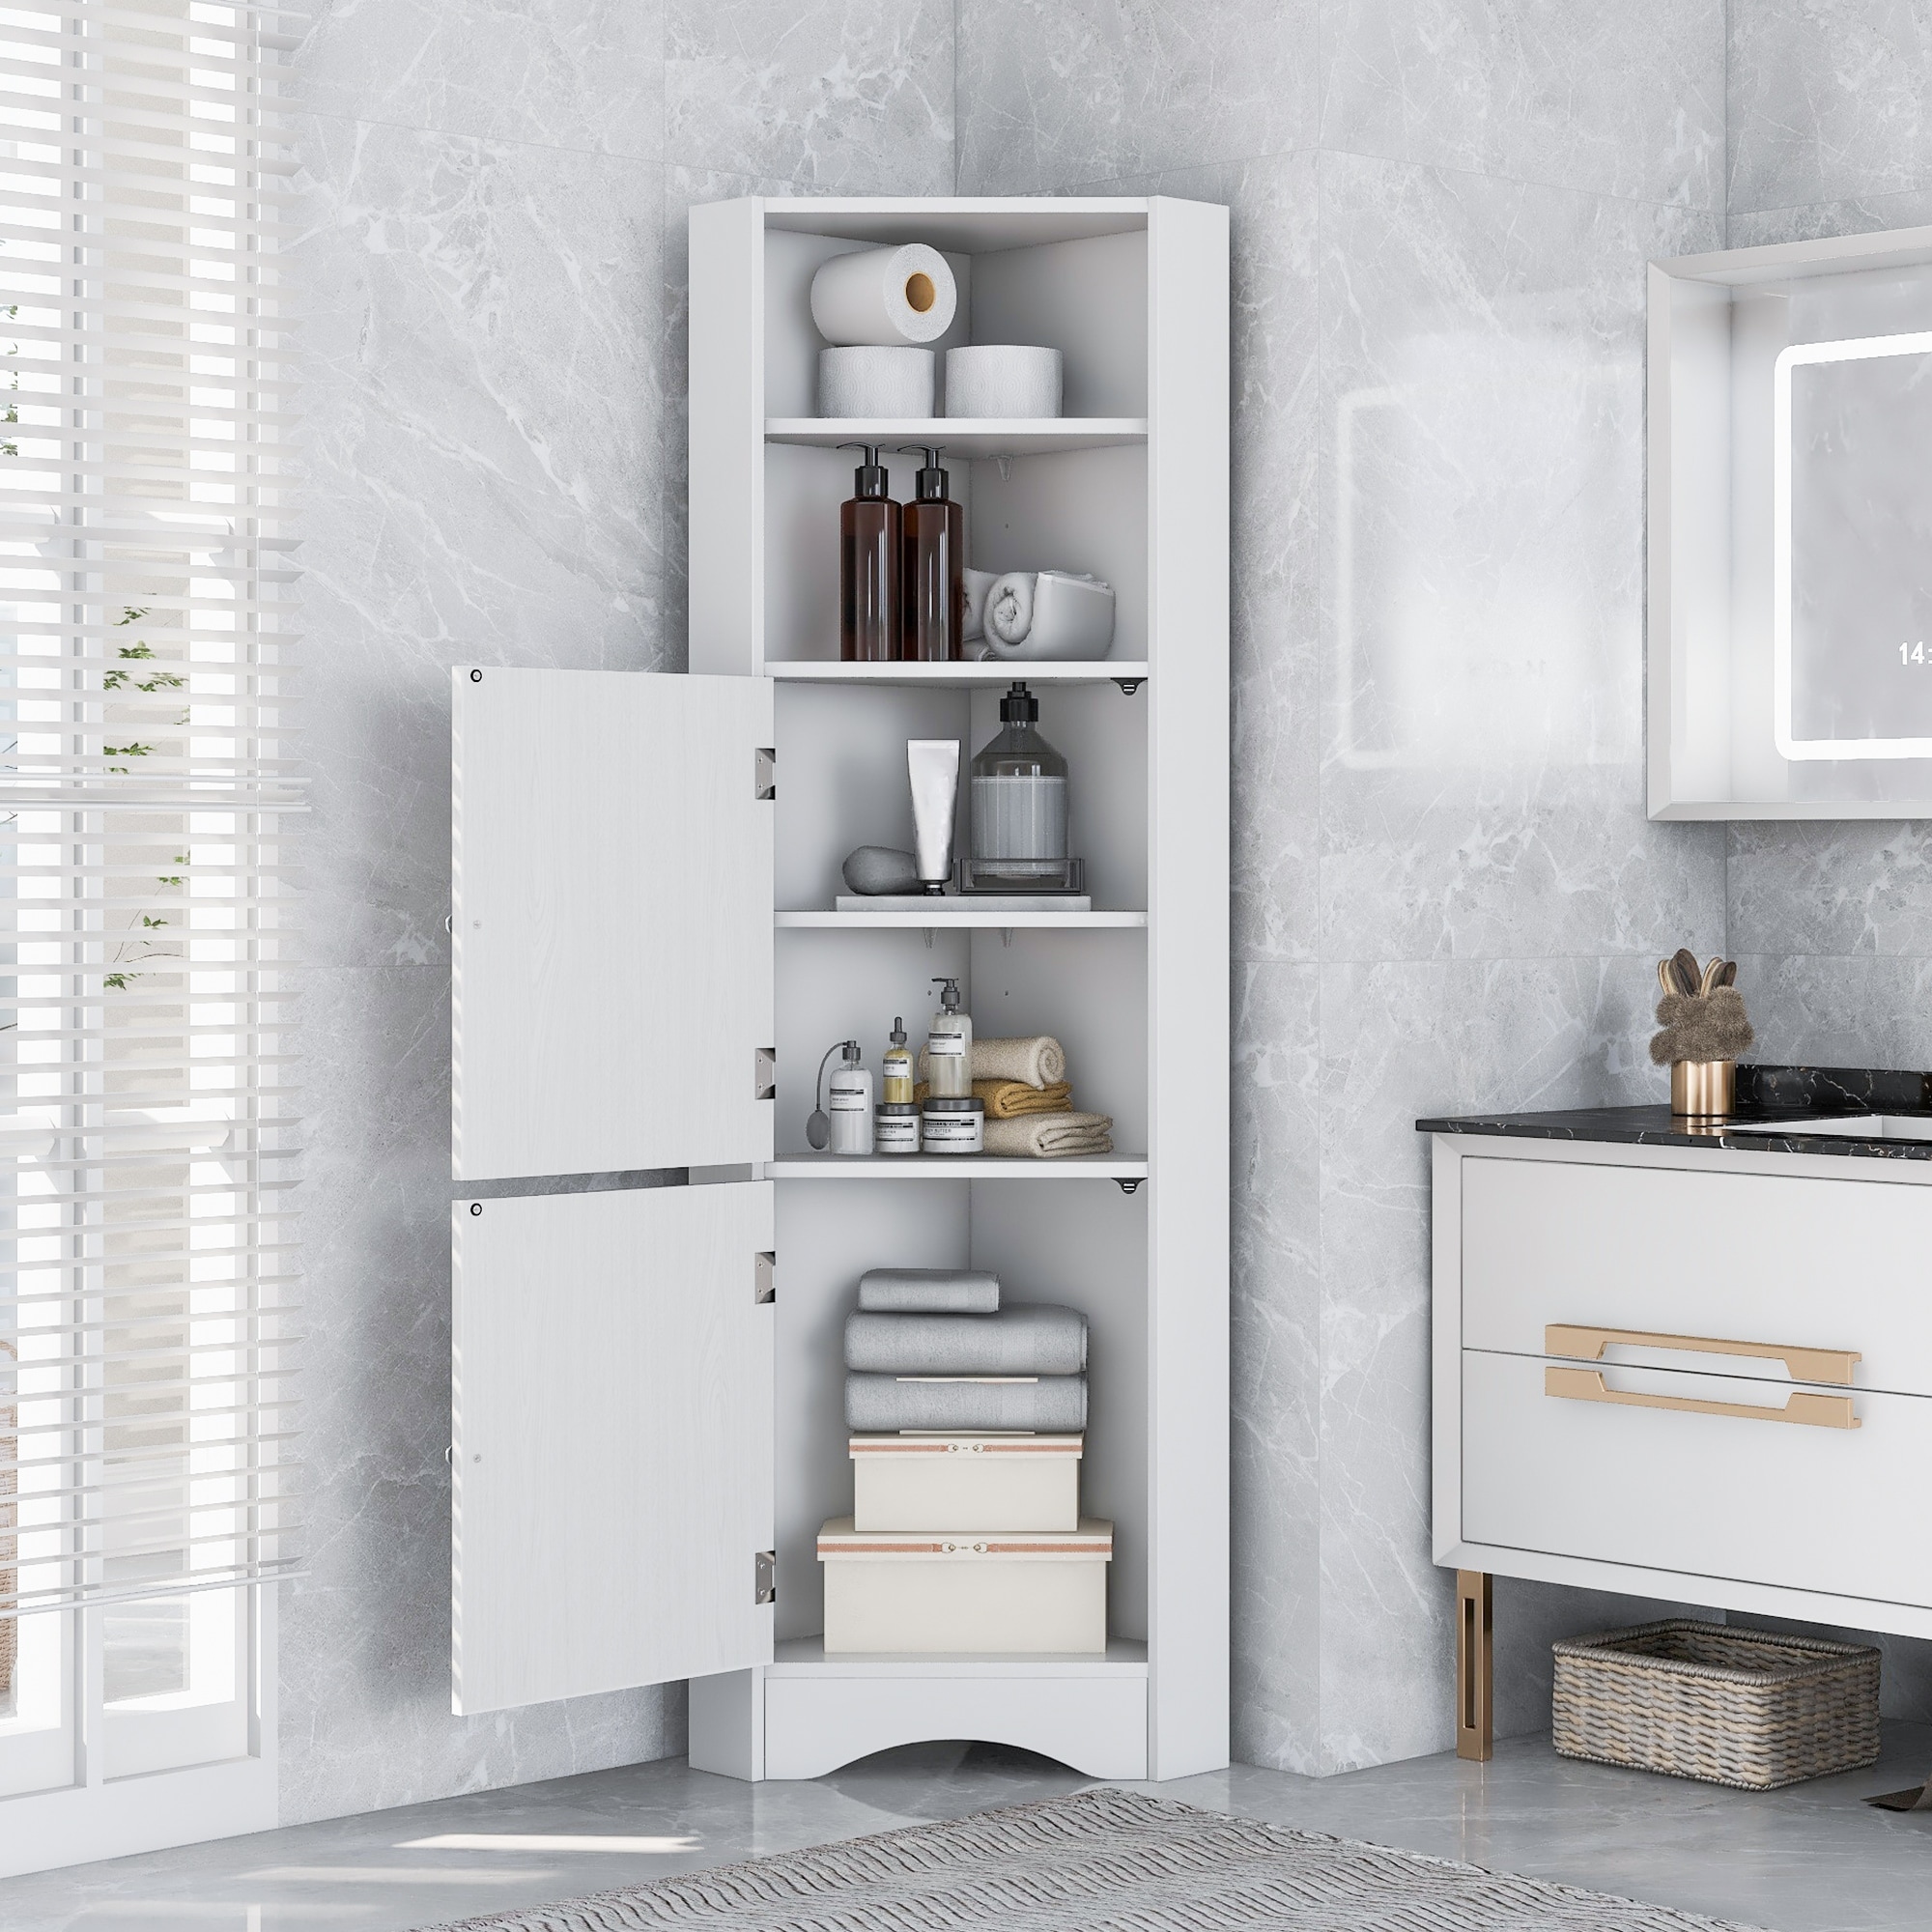 https://ak1.ostkcdn.com/images/products/is/images/direct/38c24092da183dd77ffe55ec9b9abc32a3a74270/EYIW-Tall-Bathroom-Corner-Cabinet%2C-Freestanding-Storage-Cabinet-with-Doors-and-Adjustable-Shelves%2C-MDF-Board.jpg